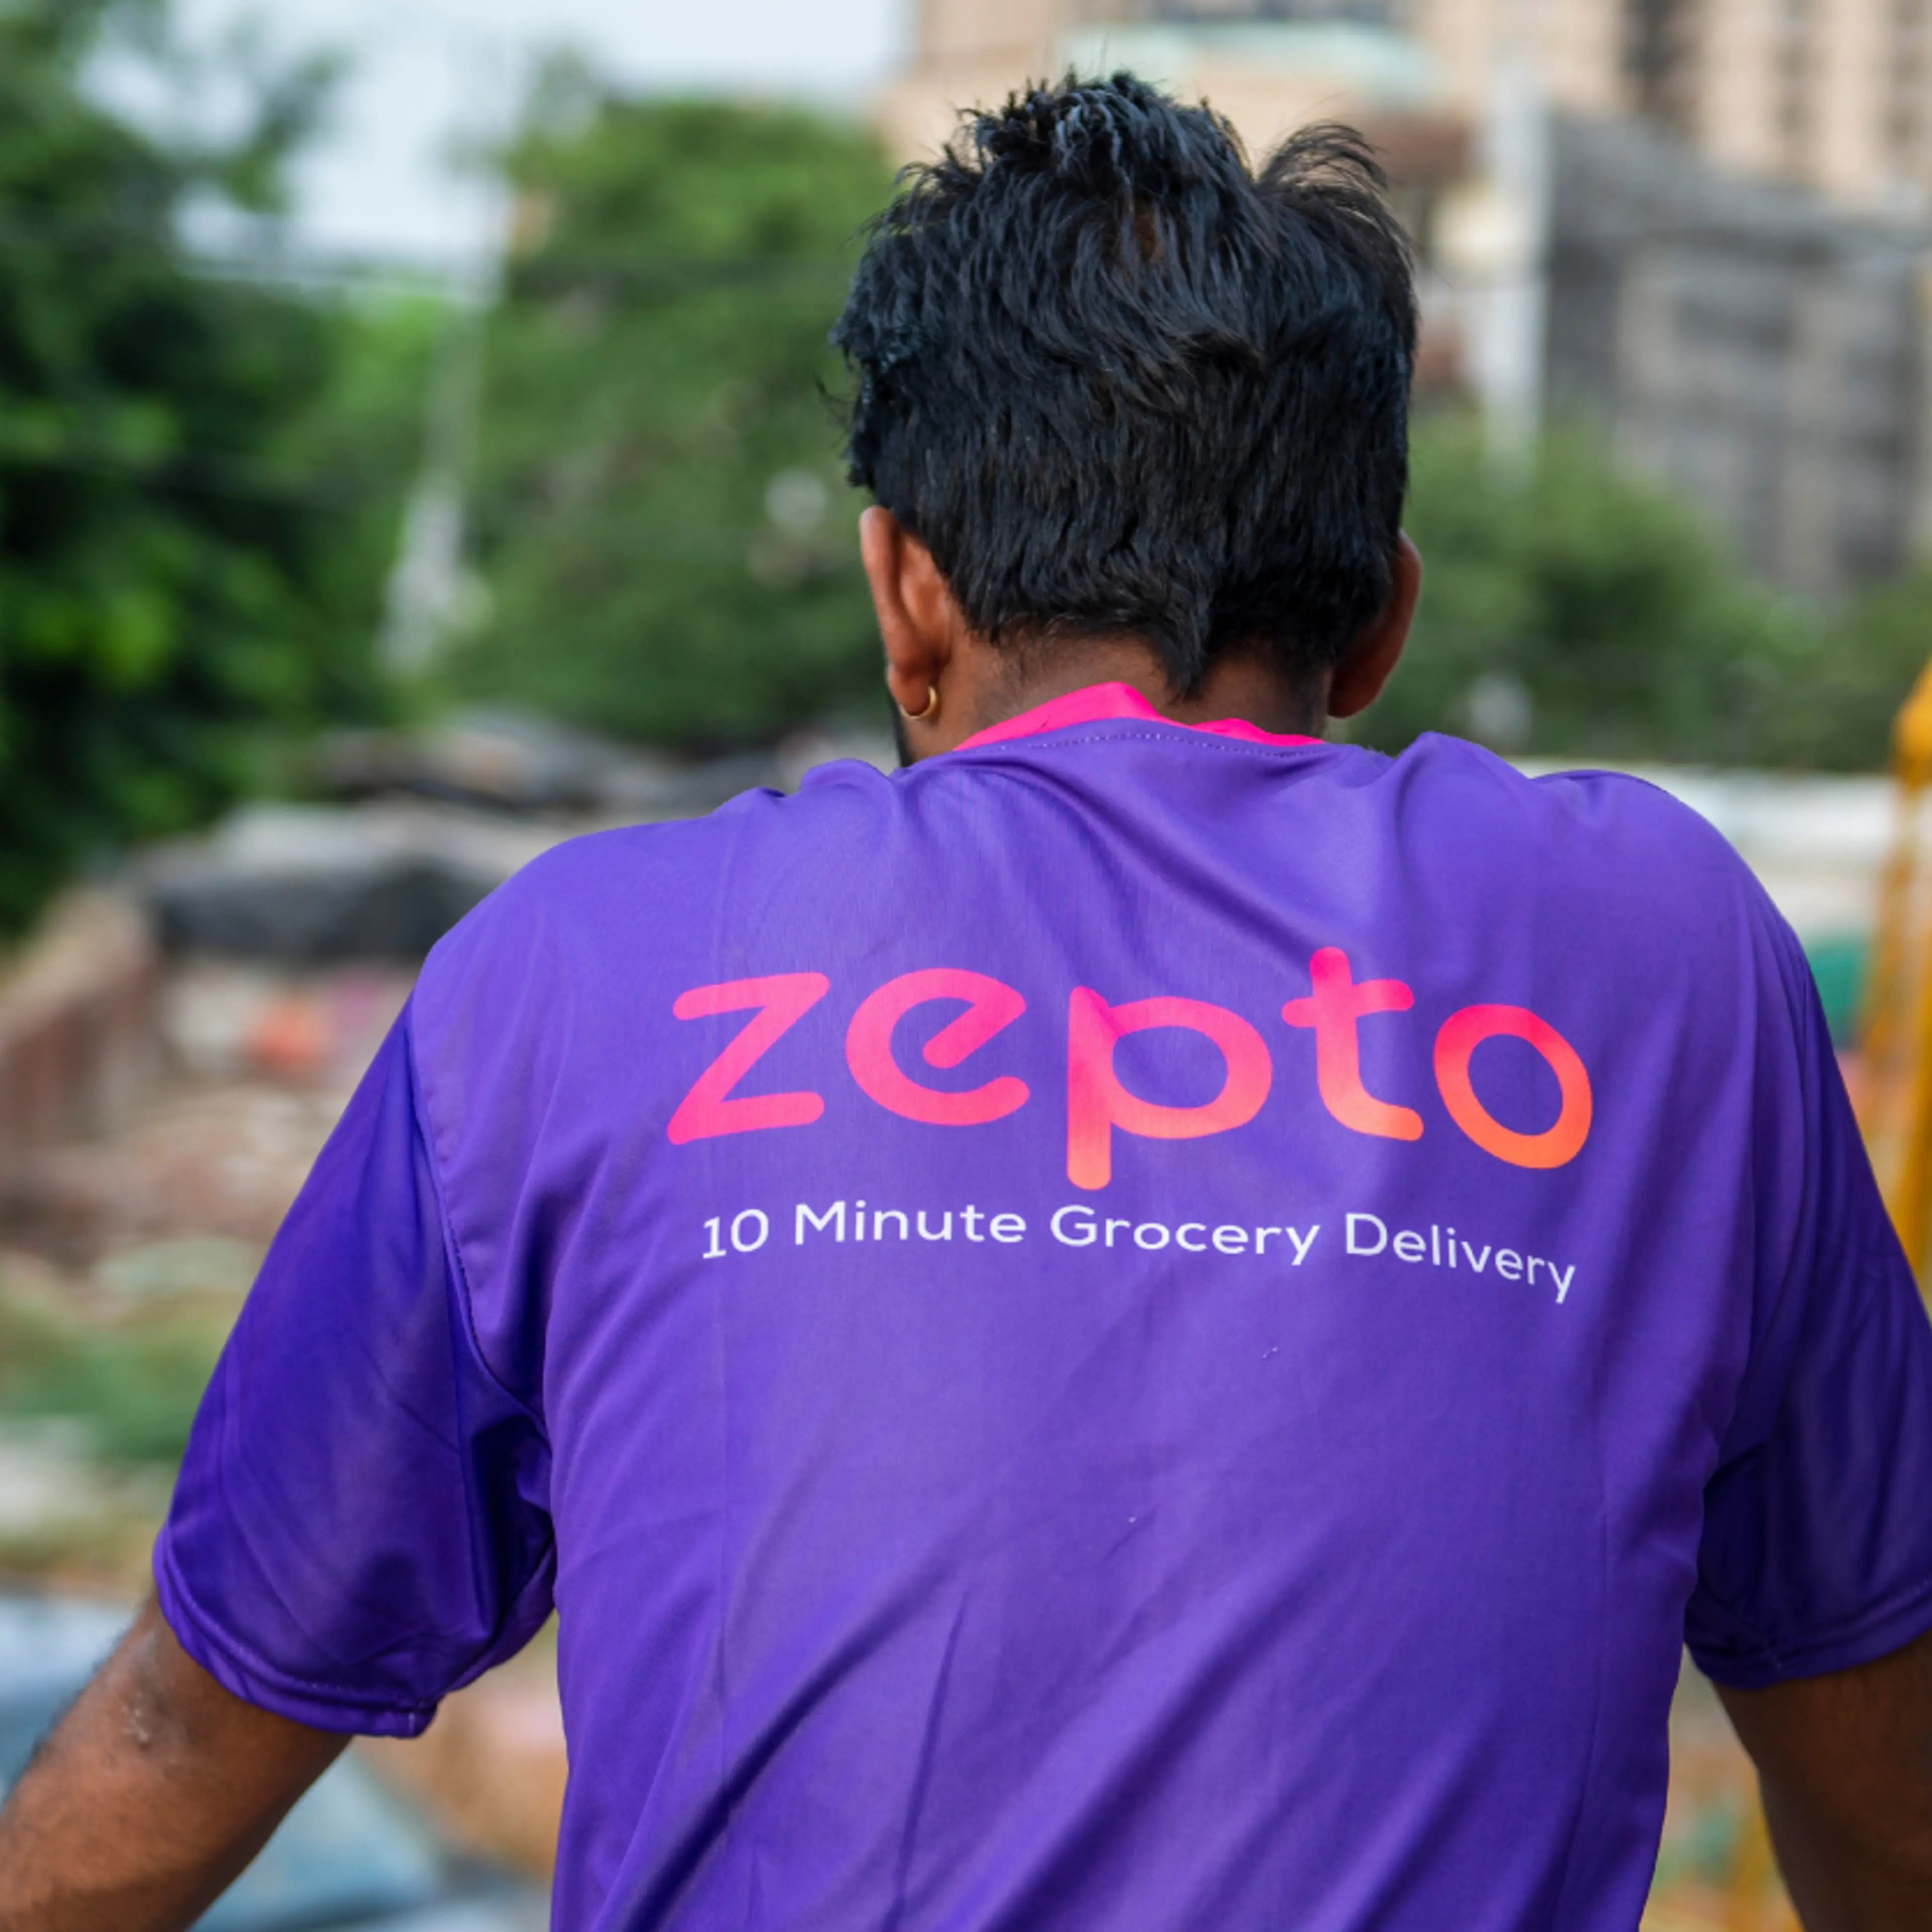 Zepto rolls out loyalty programme Zepto Pass for free deliveries and discounts